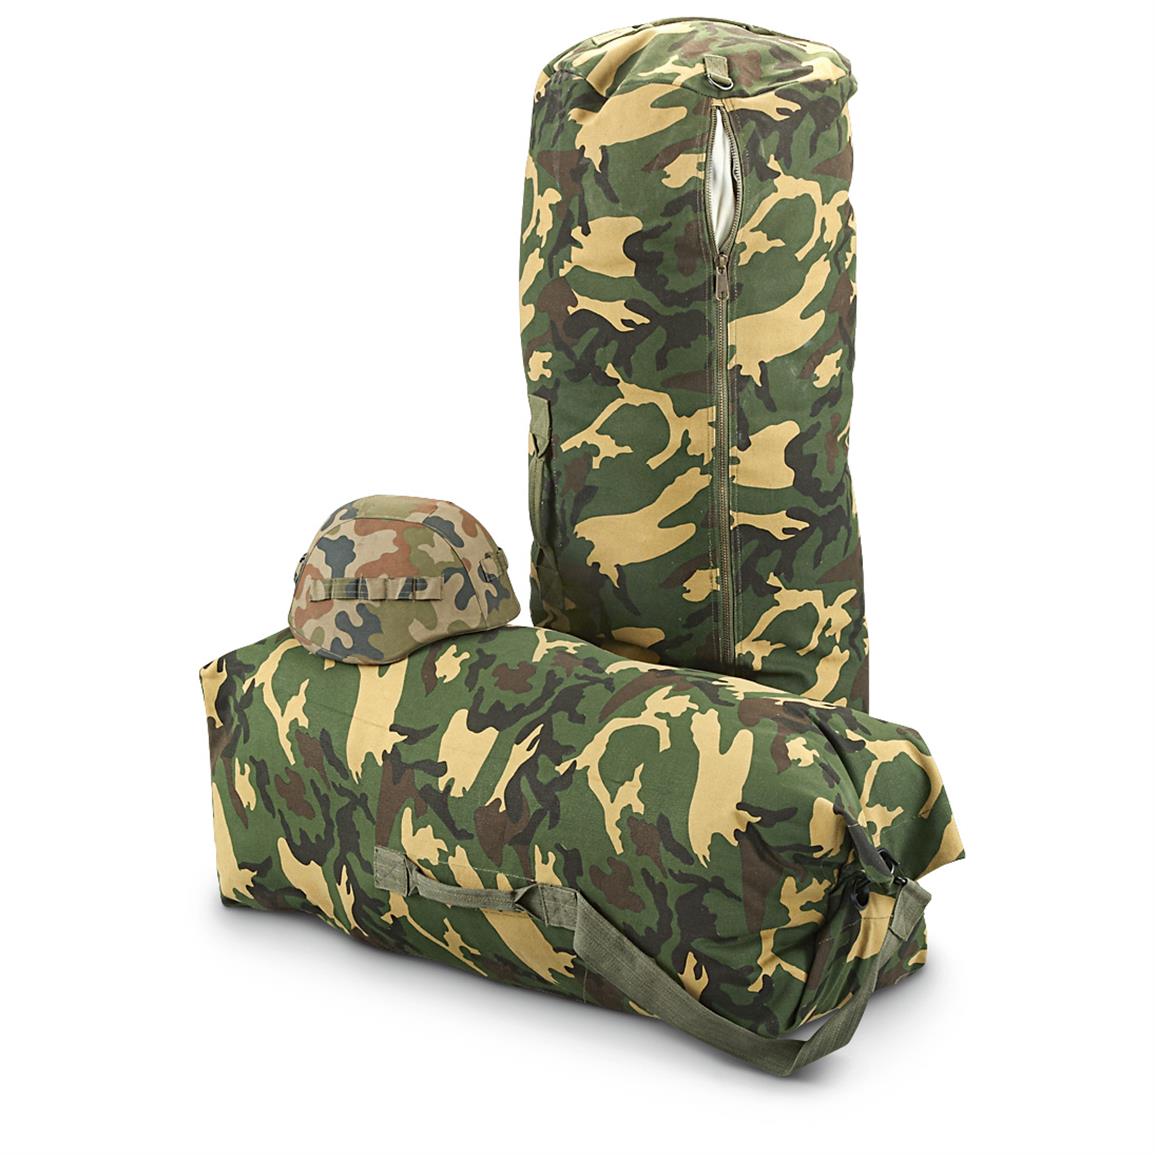 Canvas 30x50&quot; Duffel Bag, Woodland Camo - 578777, Military & Camo Duffle Bags at Sportsman&#39;s Guide